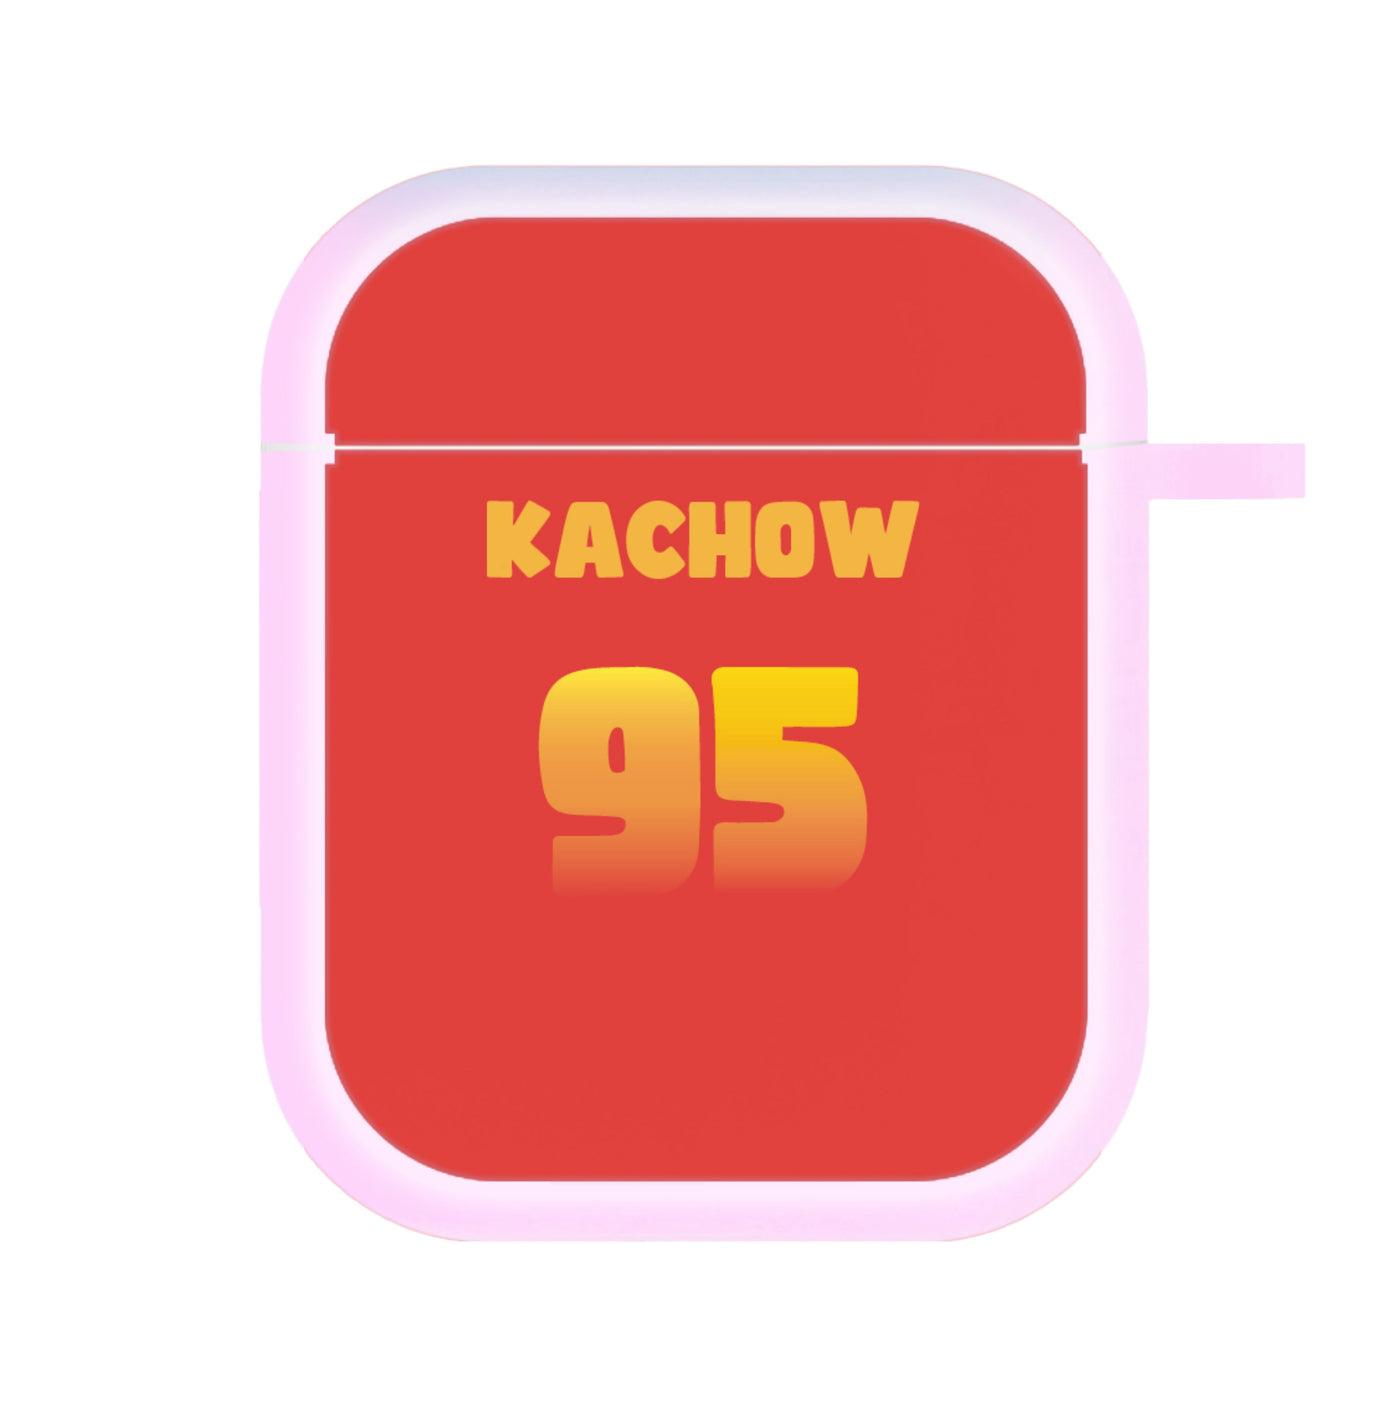 Kachow 95 - Cars AirPods Case